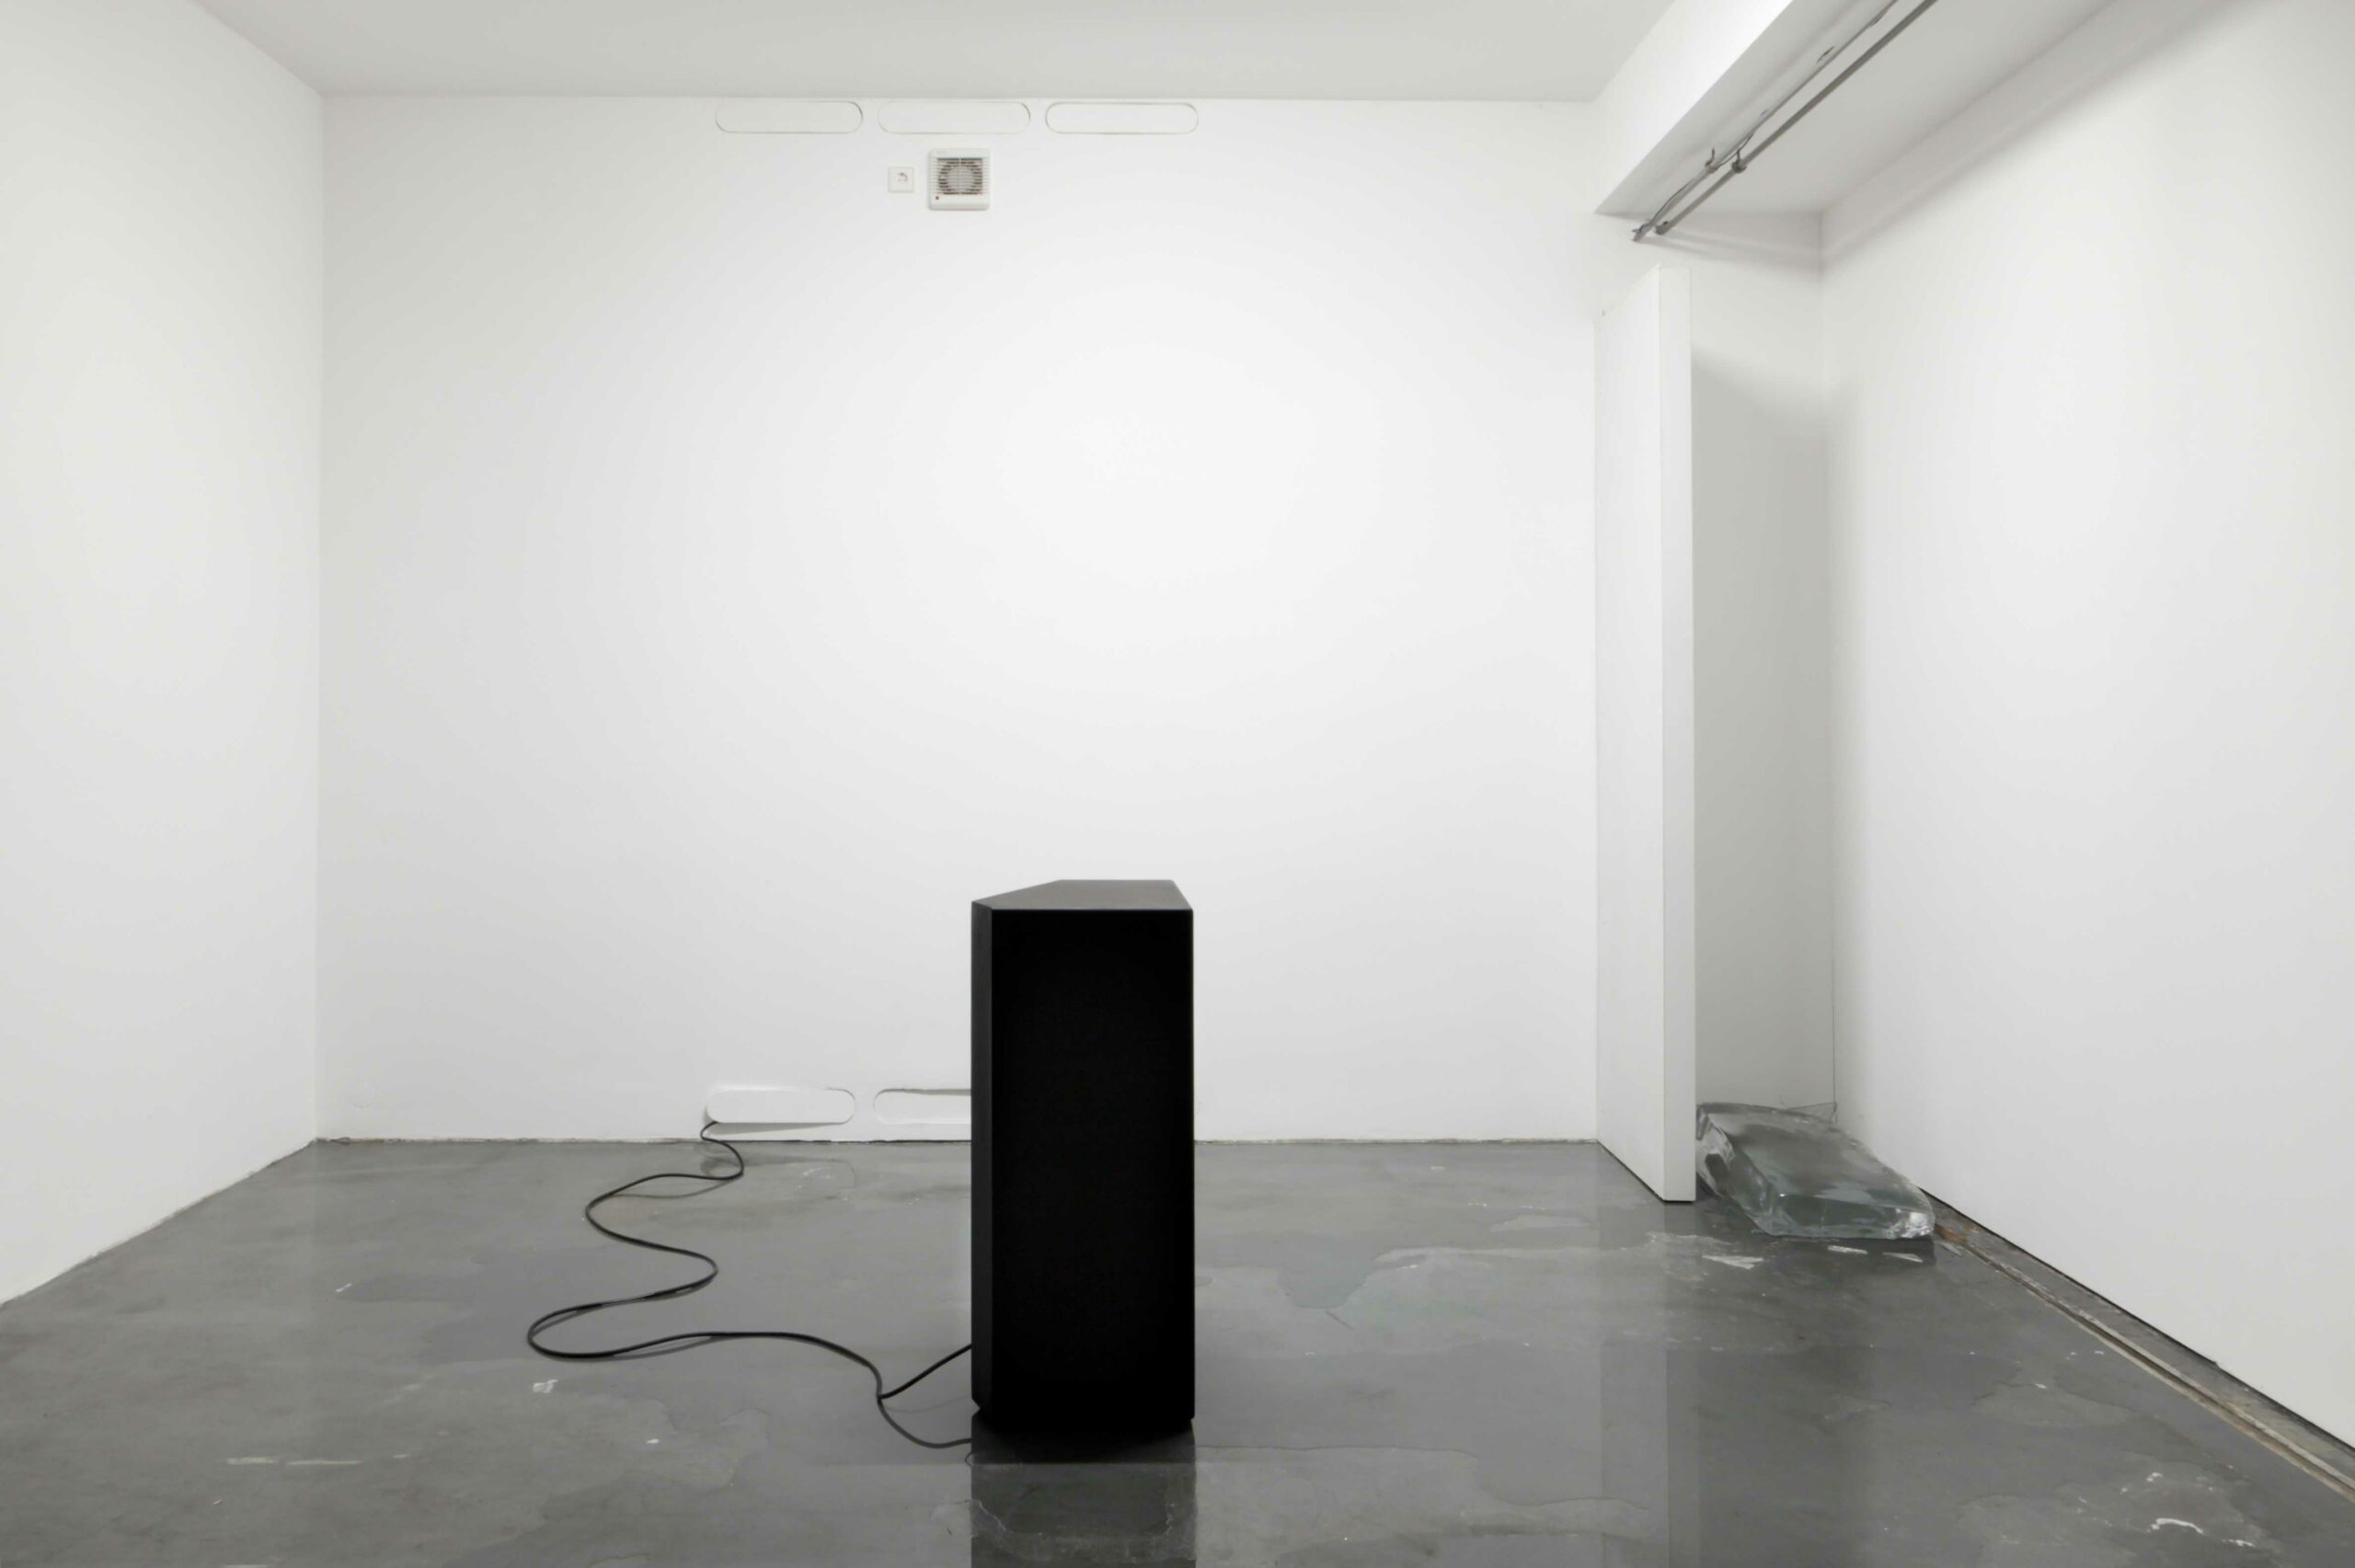 “Conversation”, 2013, synthetically produced water sounds, ice block, PA speaker, in collaboration with Tolia Astali